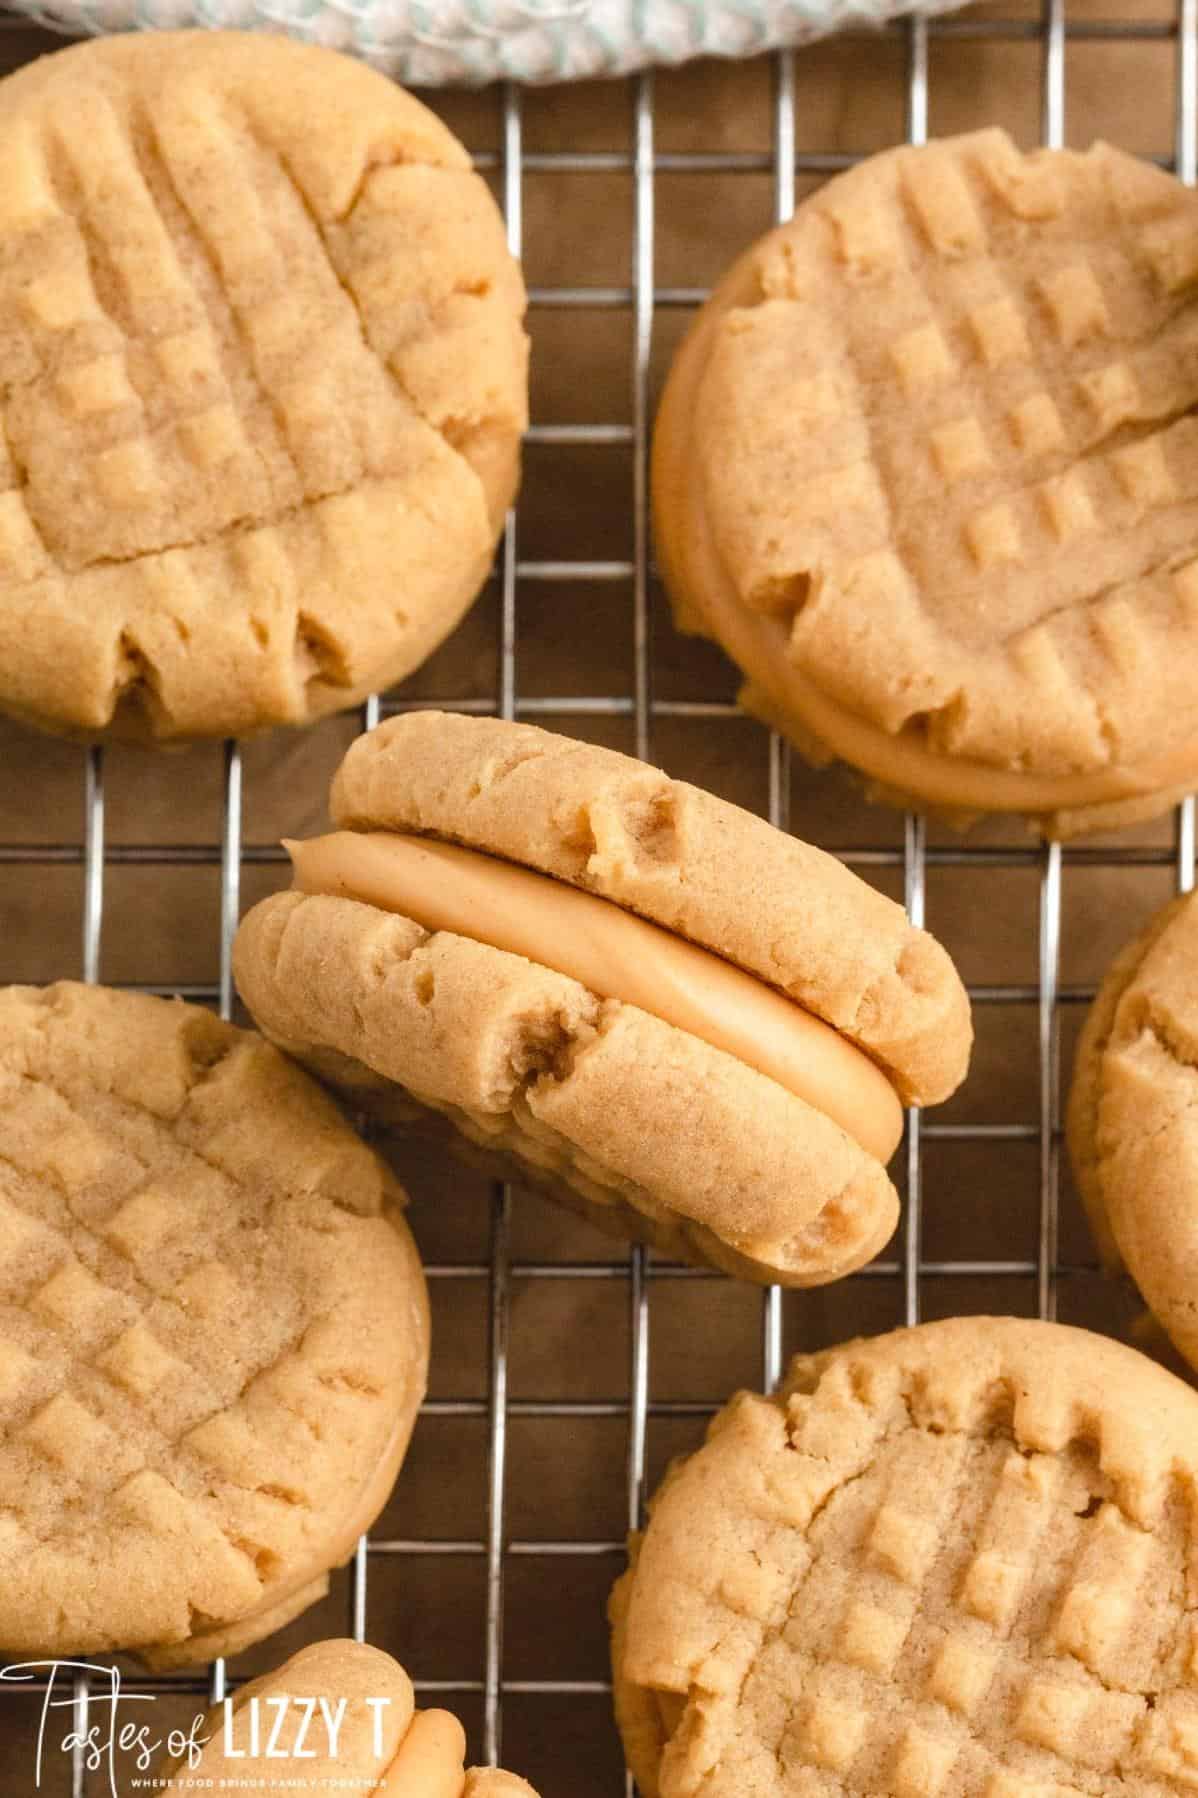  Elevate your cookie game with these decadent inside-out peanut butter cookie sandwiches.